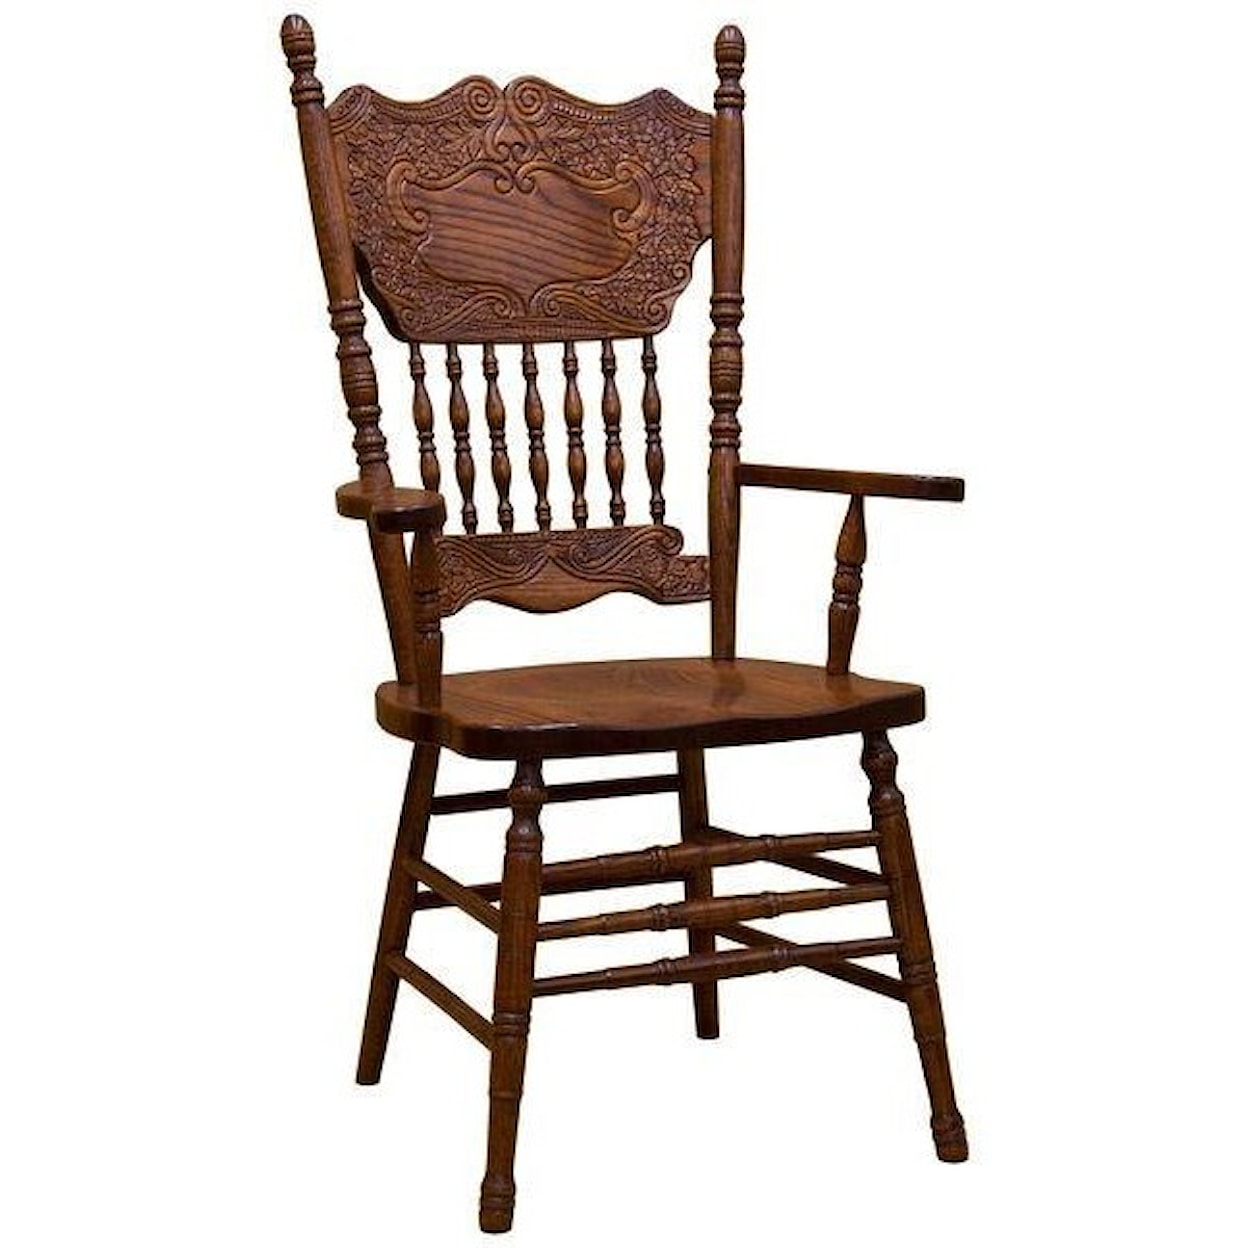 Country Comfort Woodworking Groveport Arm Chair